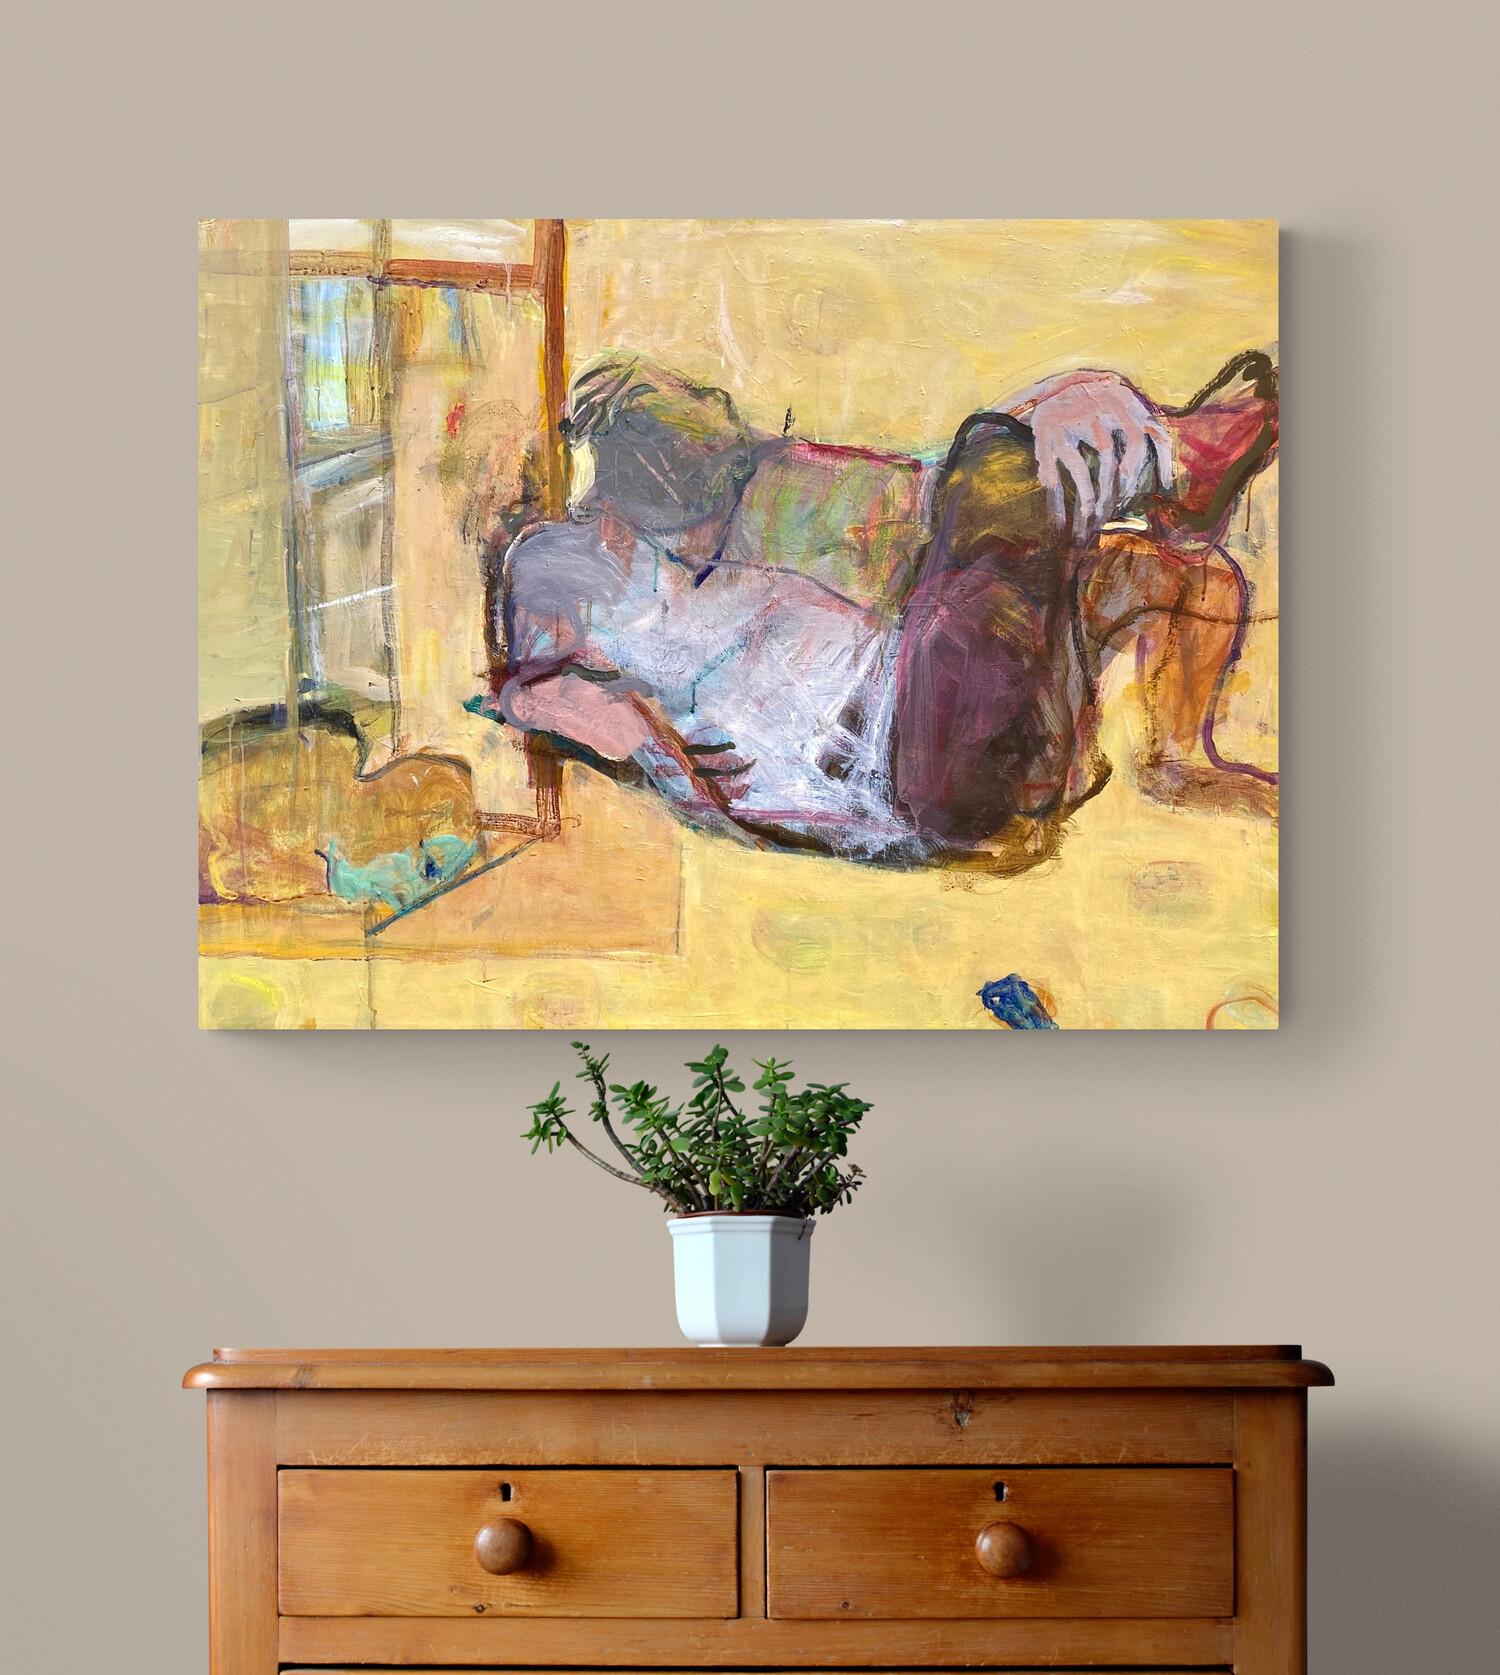 Pastel Yellow Expressive Abstracted Figurative Painting on Canvas For Sale 5